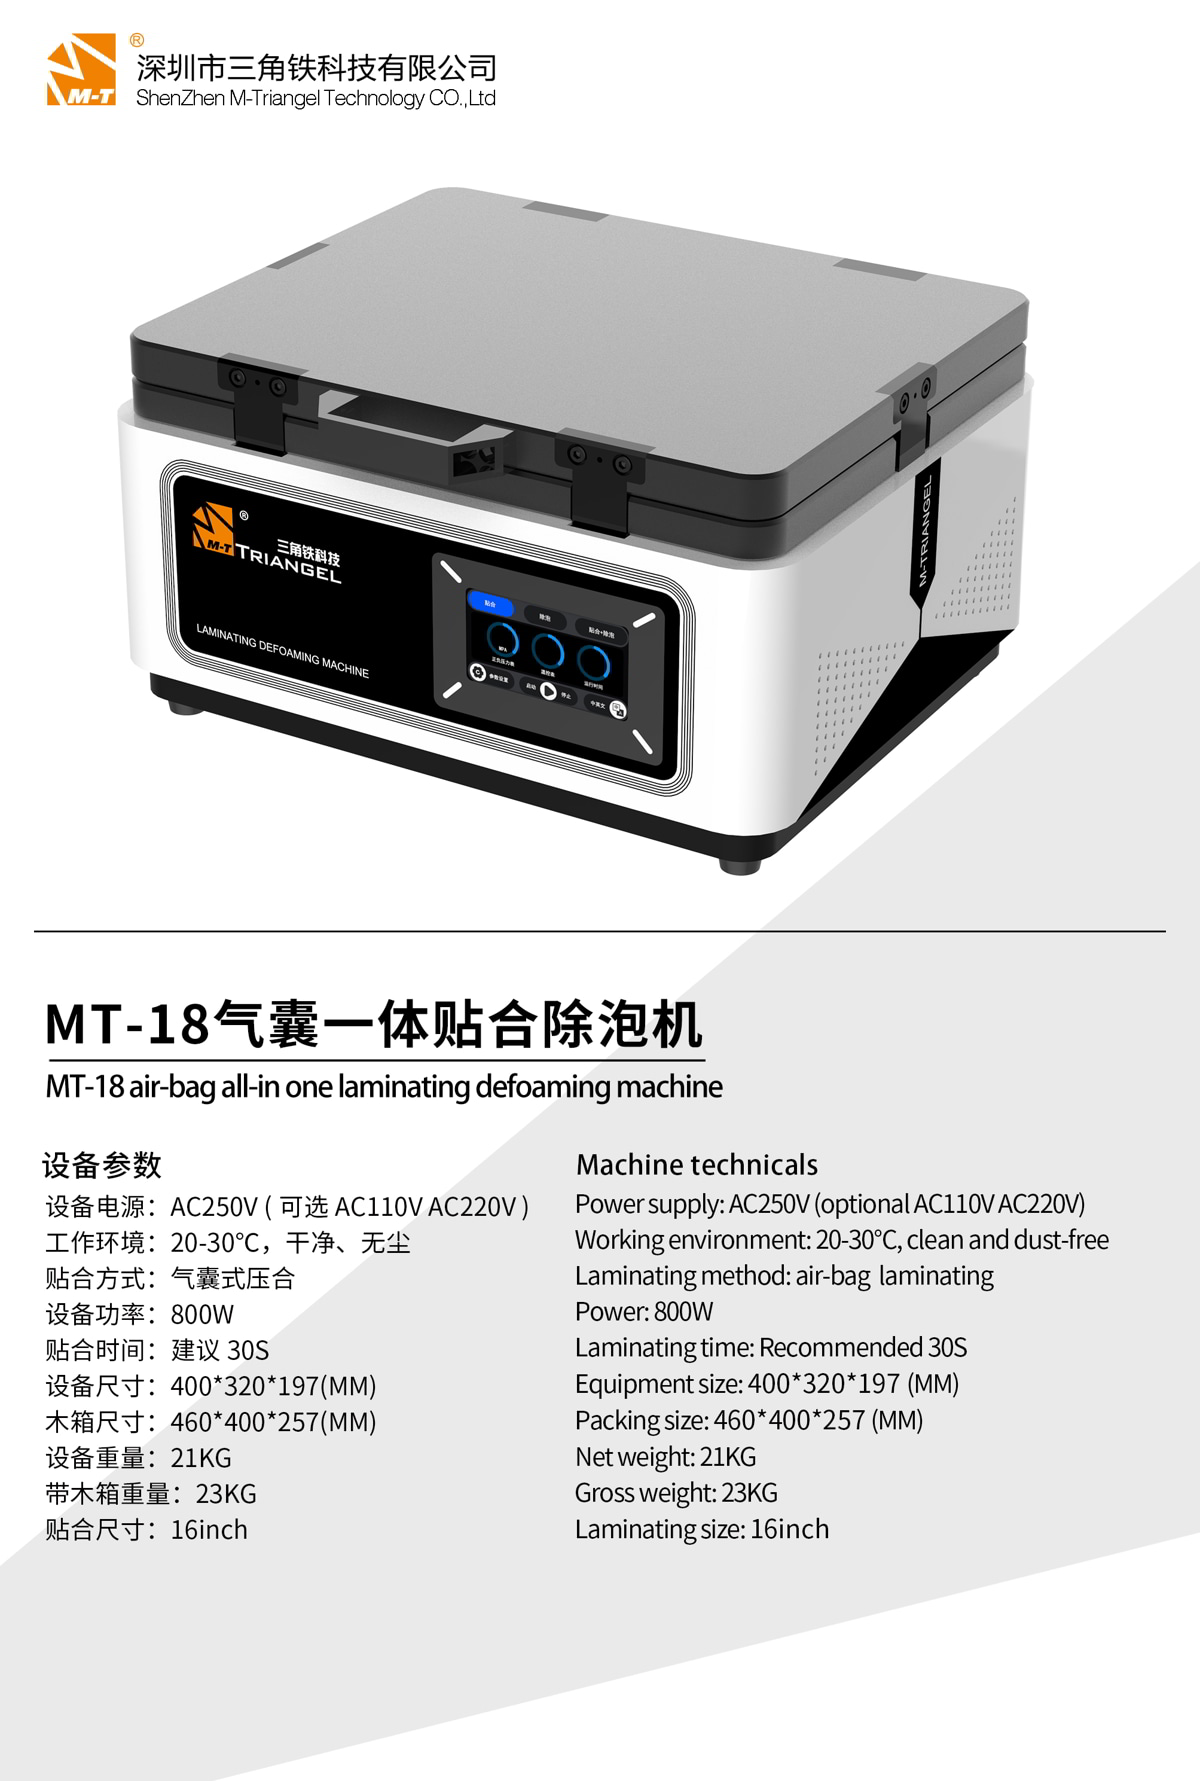 mt 18 specification